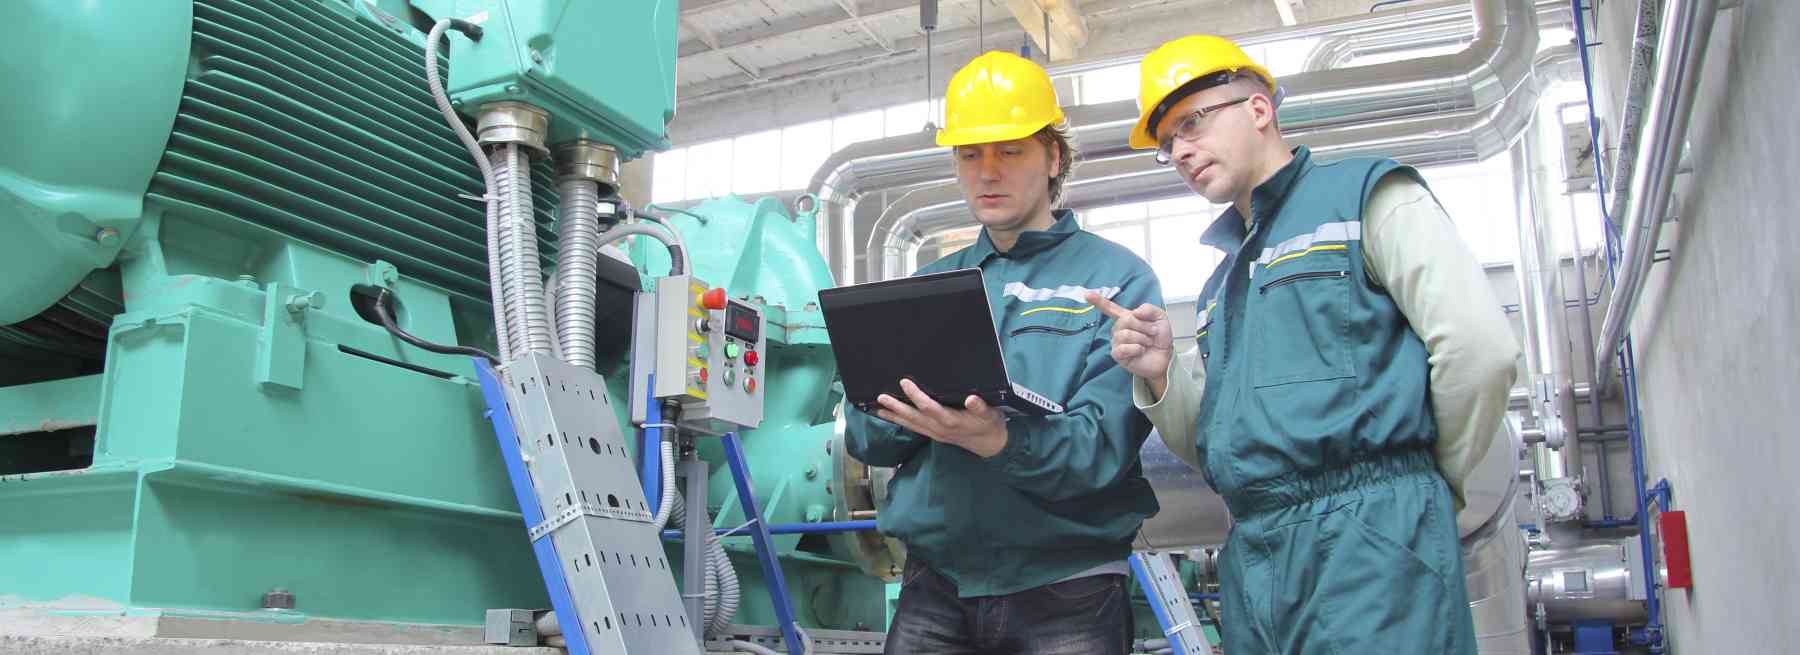 How IoT Is Impacting Manufacturing